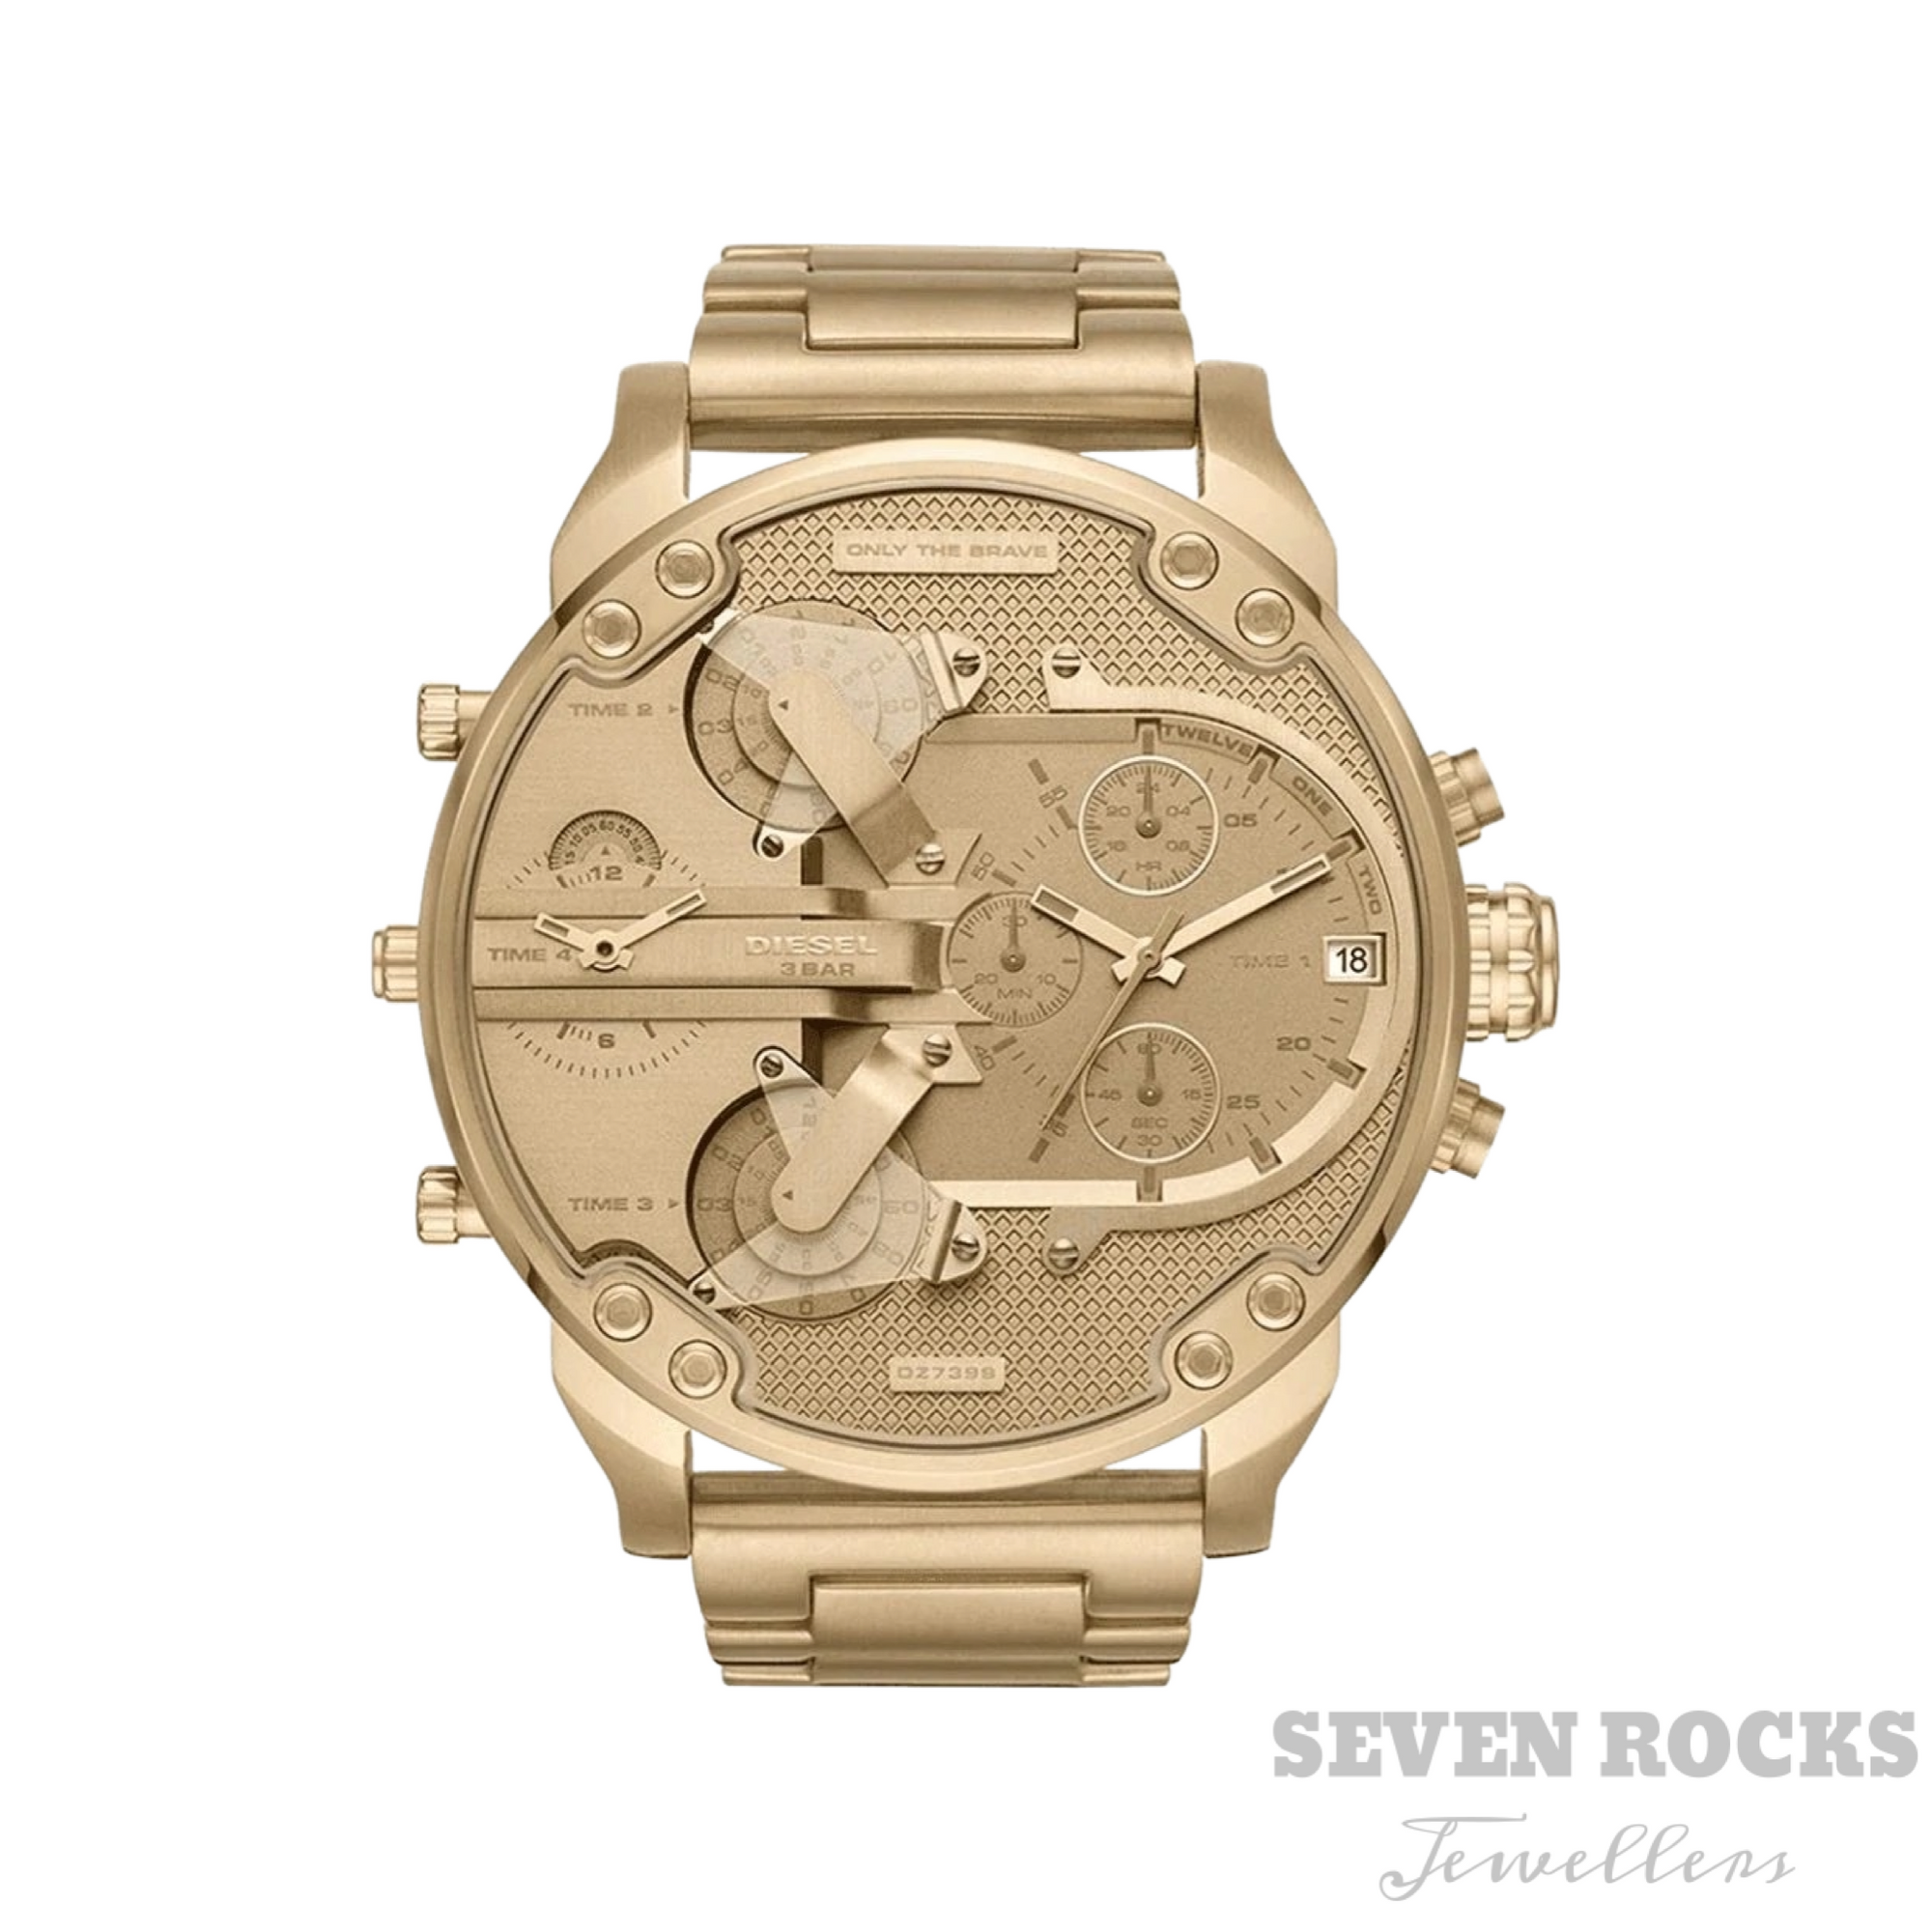 Diesel Mens Griffed Gold Plated Chronograph Watch DZ4595 - Seven Rocks